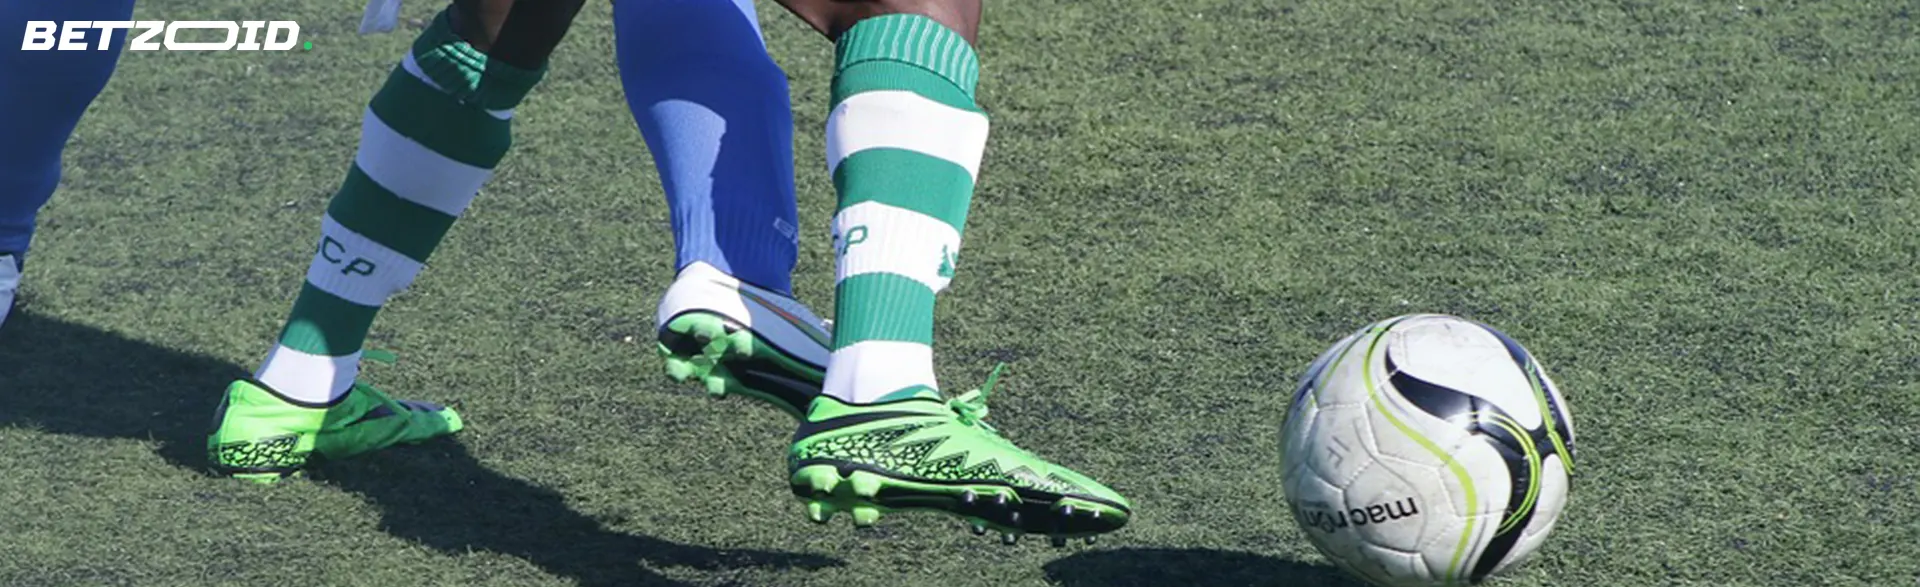 A close-up shot of a football player's feet in green and white striped socks and green shoes, ready to kick a football.